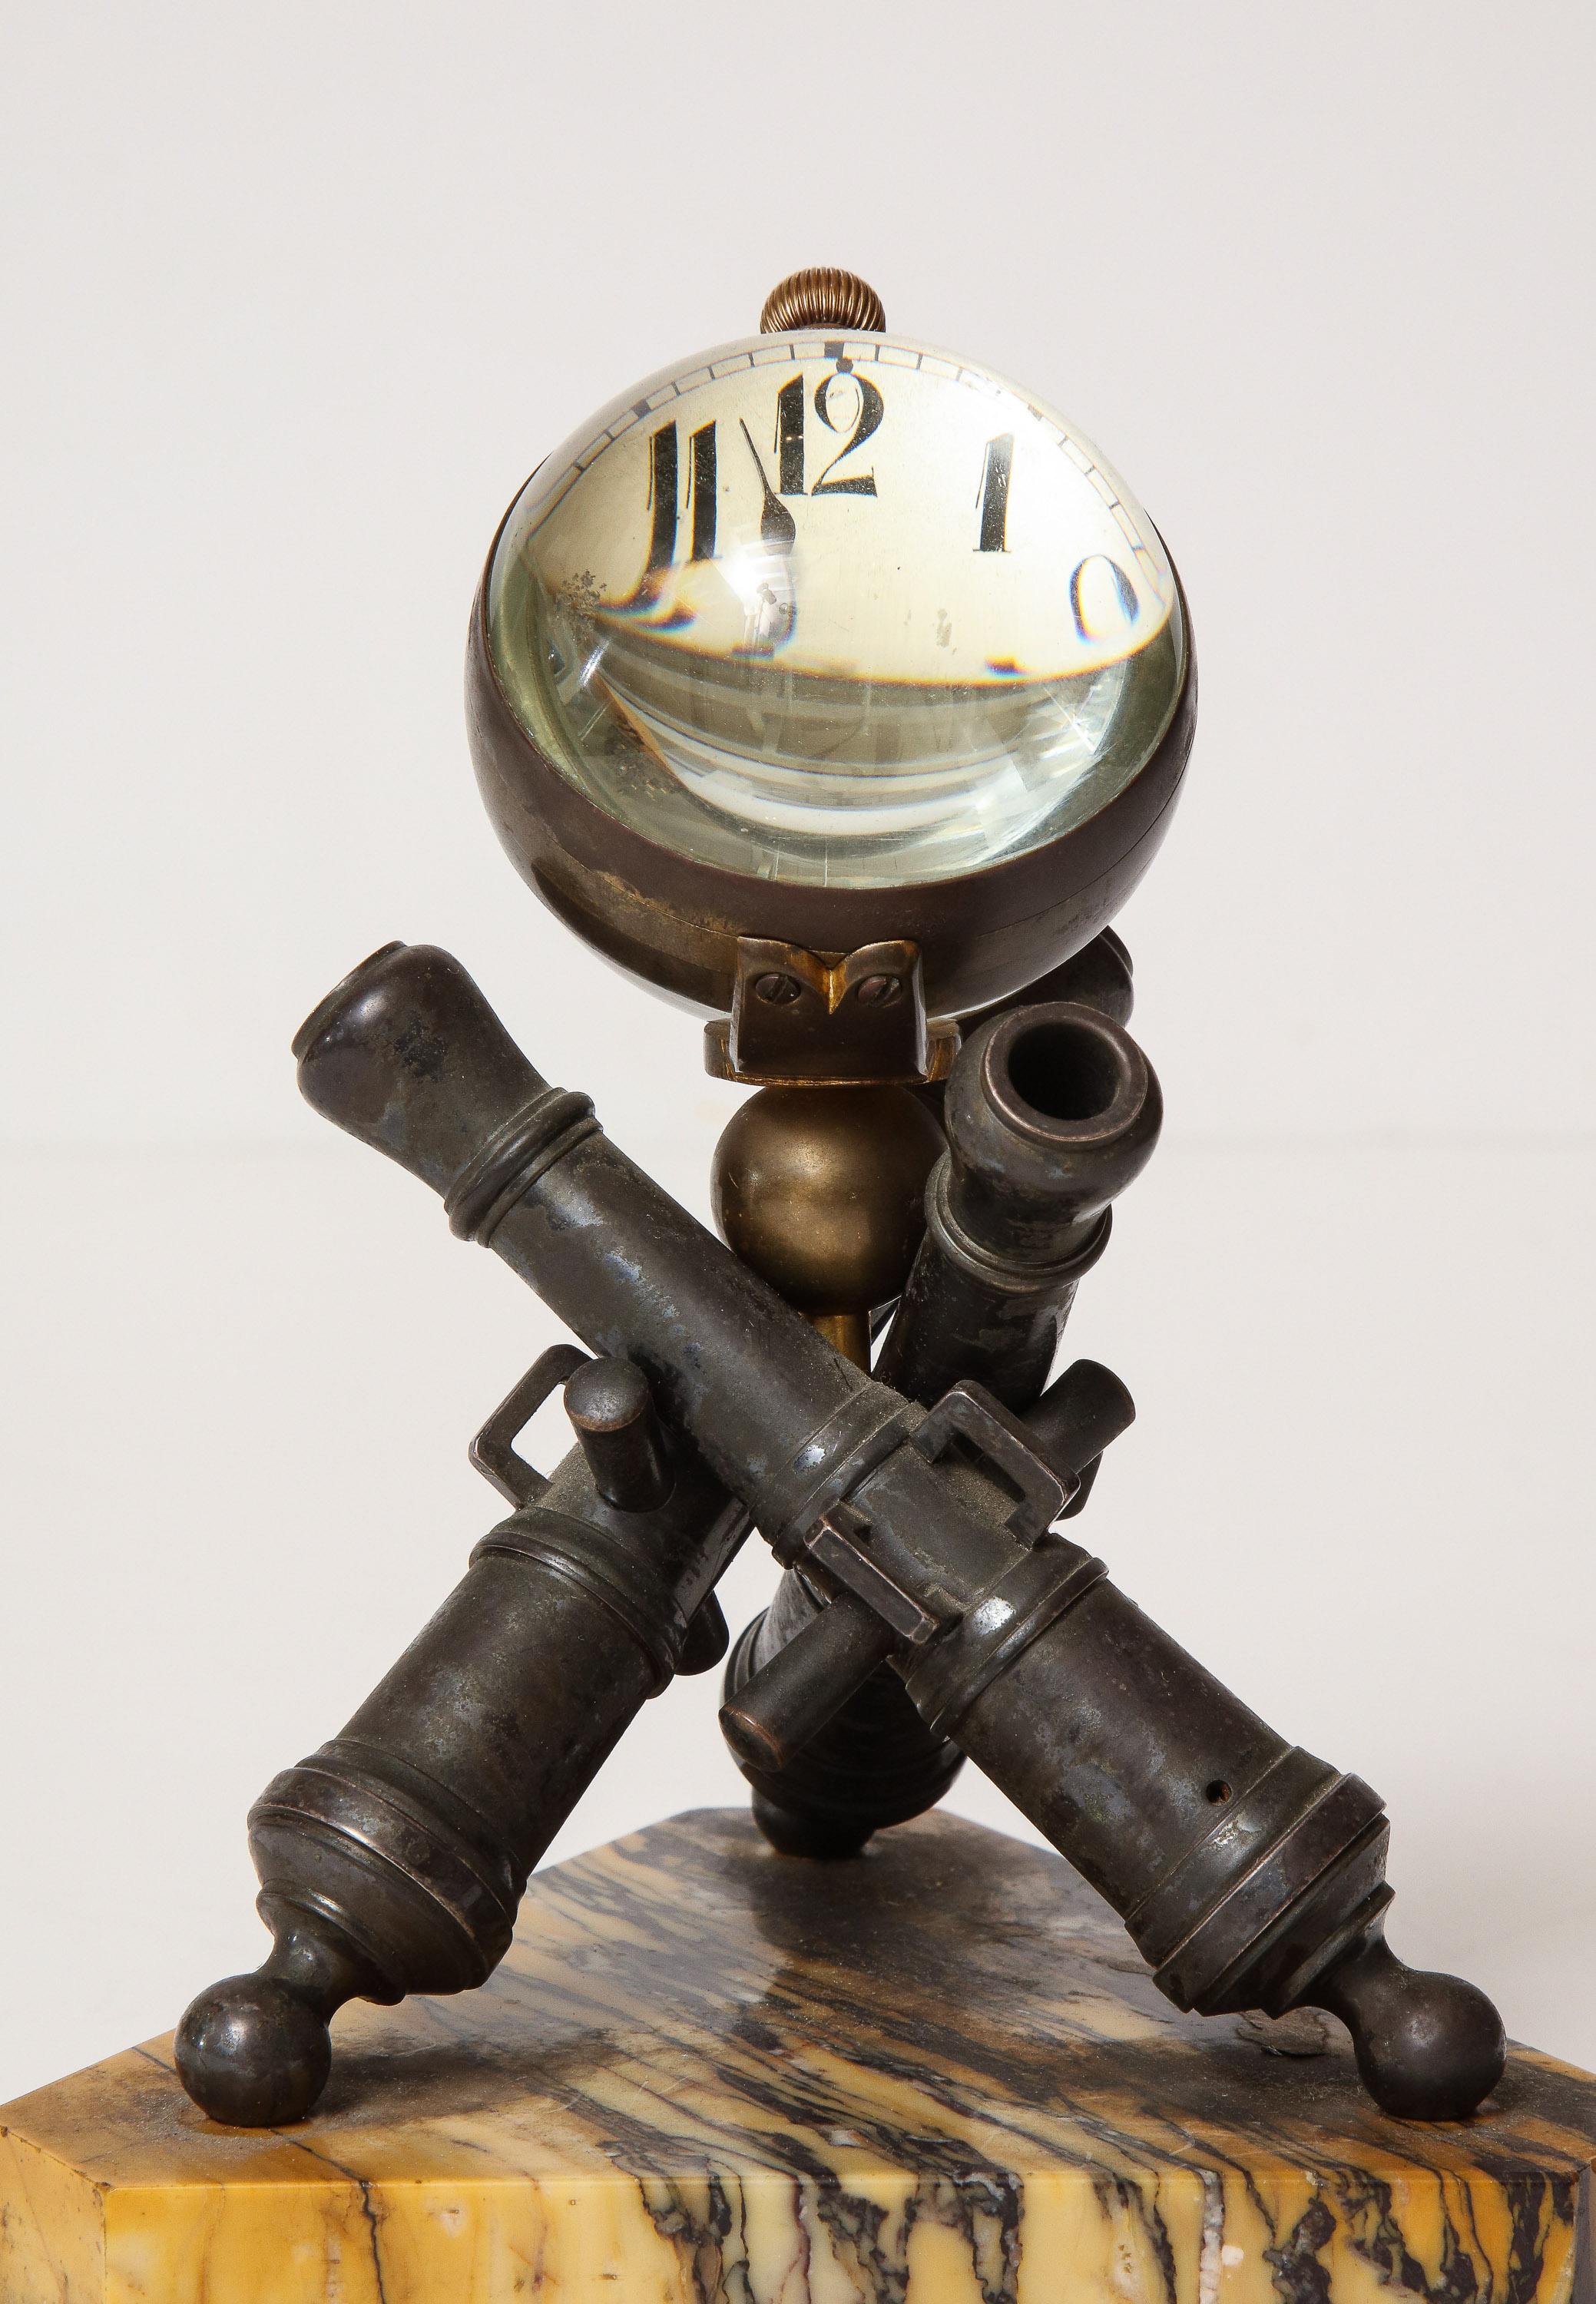 Late 19th century clock mounted on bronze cannons by W.C. Ball.